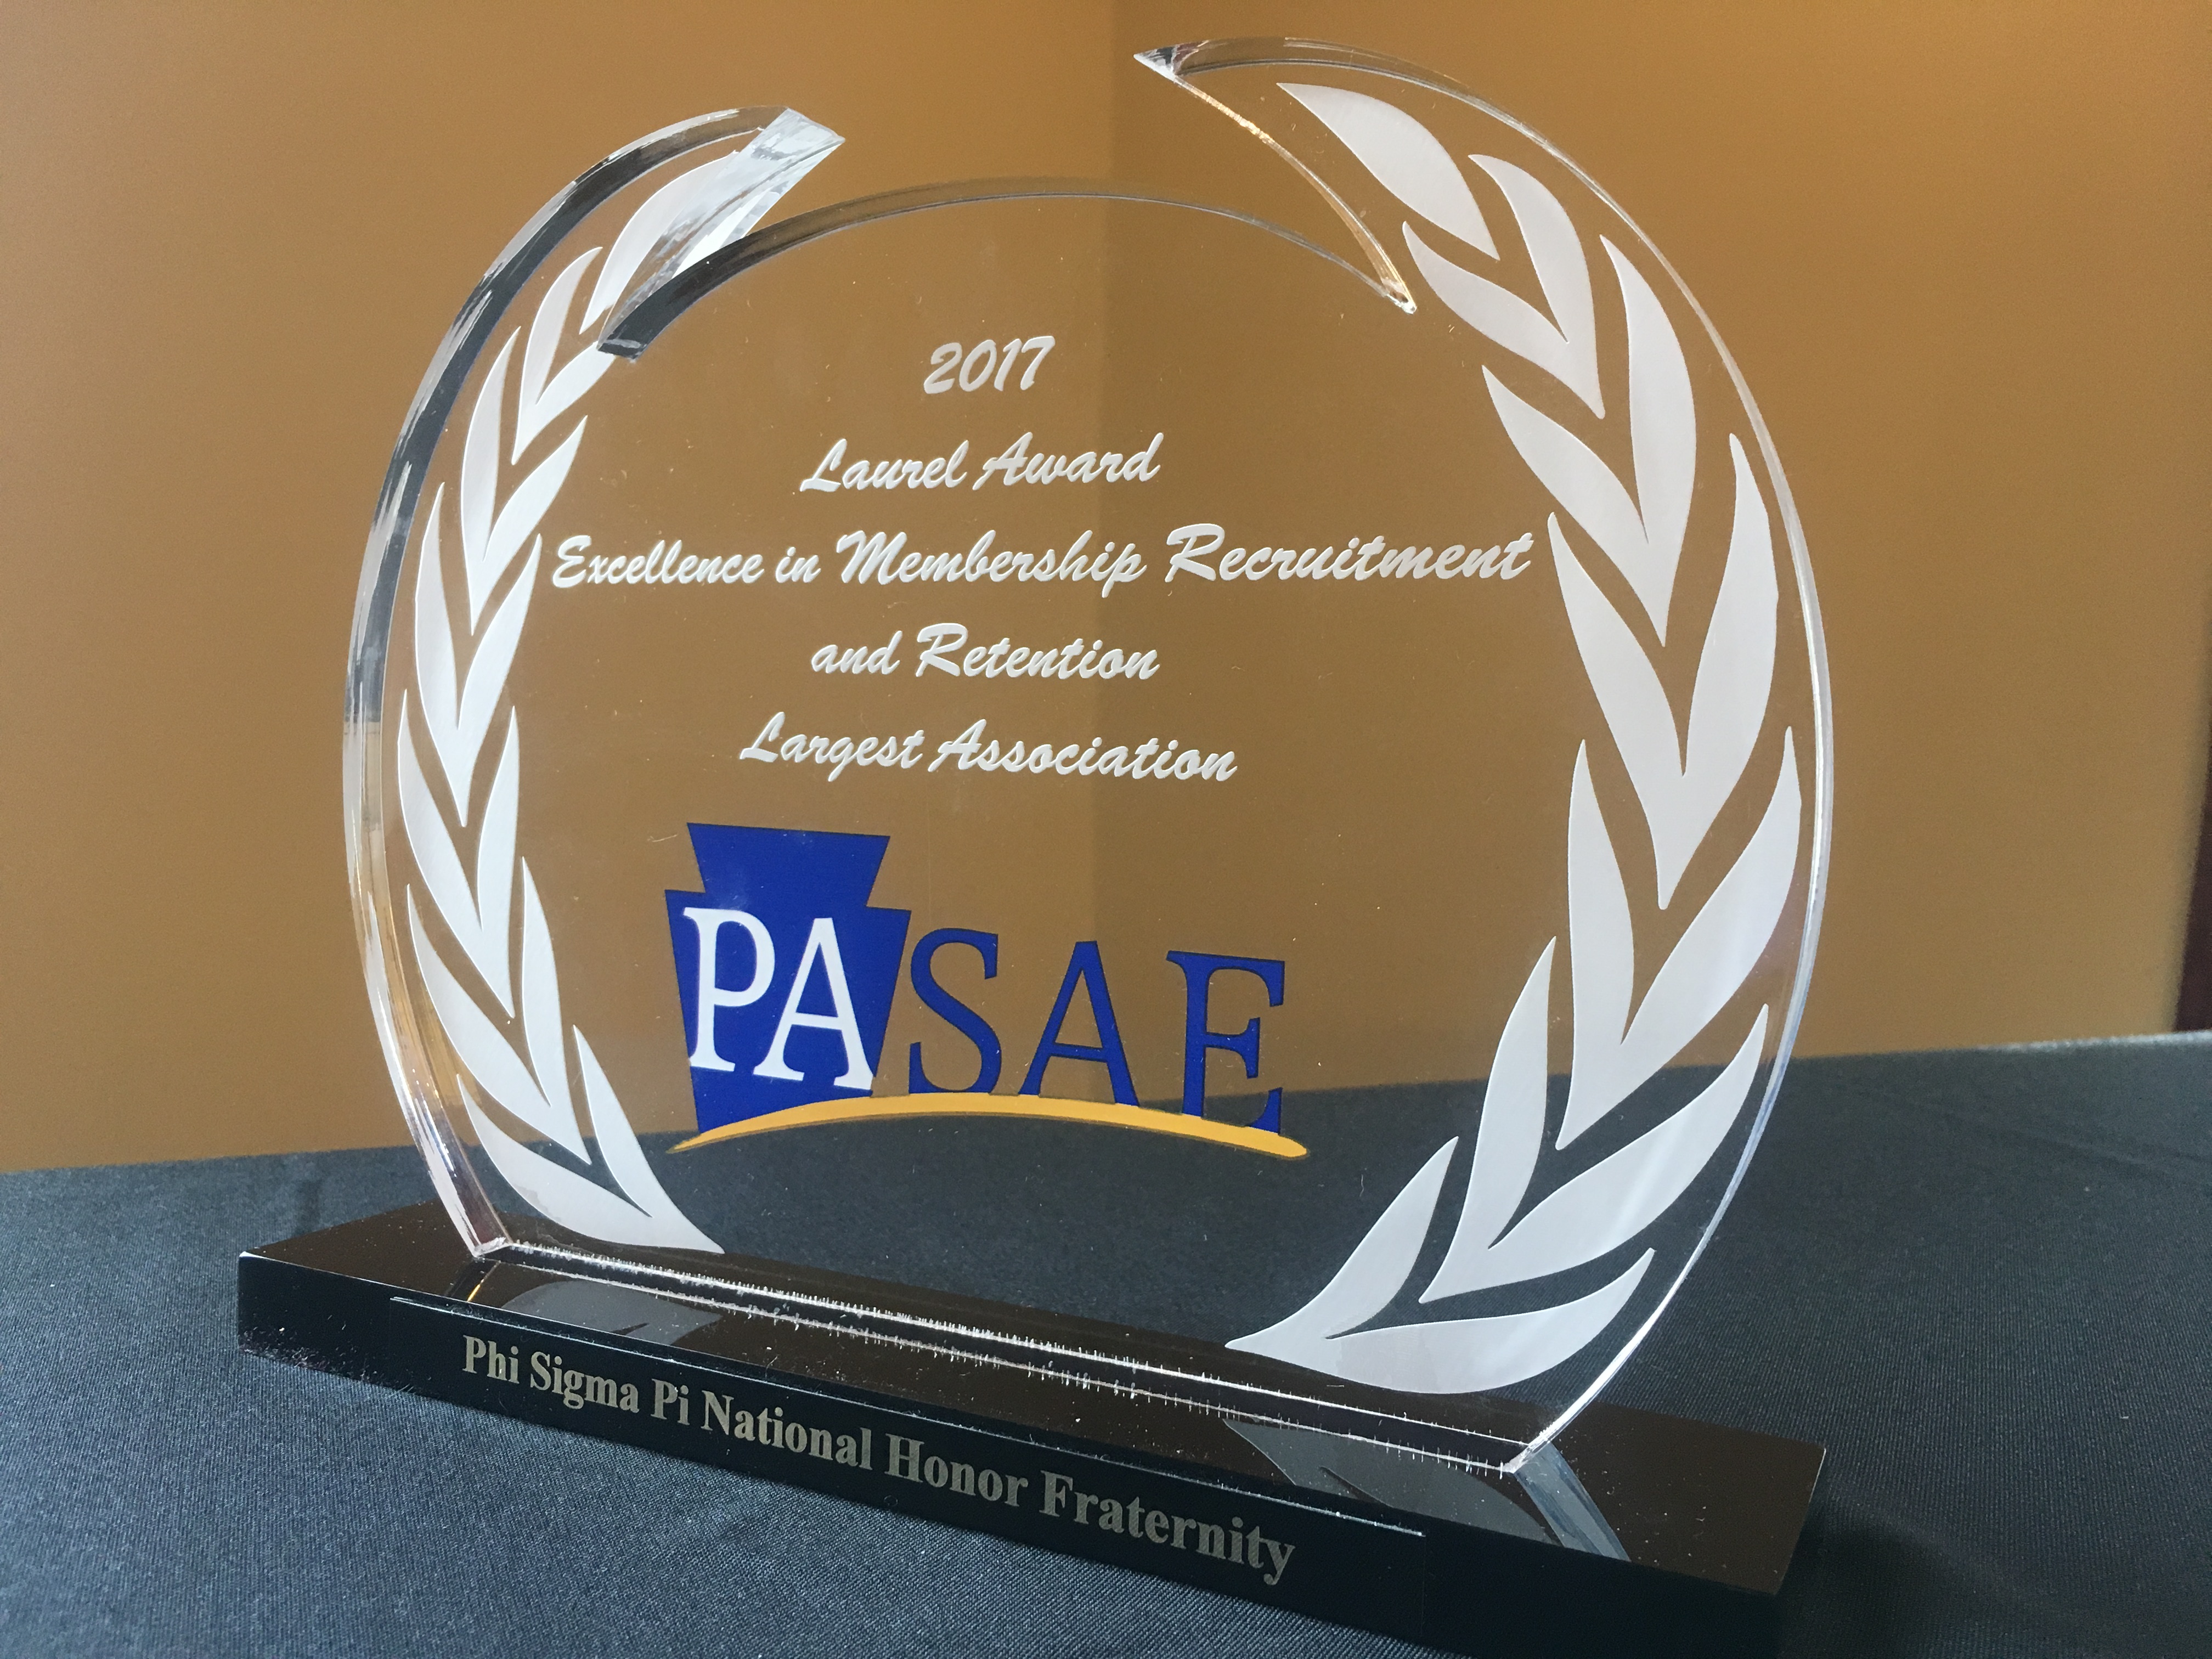 PASAE Award for Excellence in Membership Recruitment & Retention